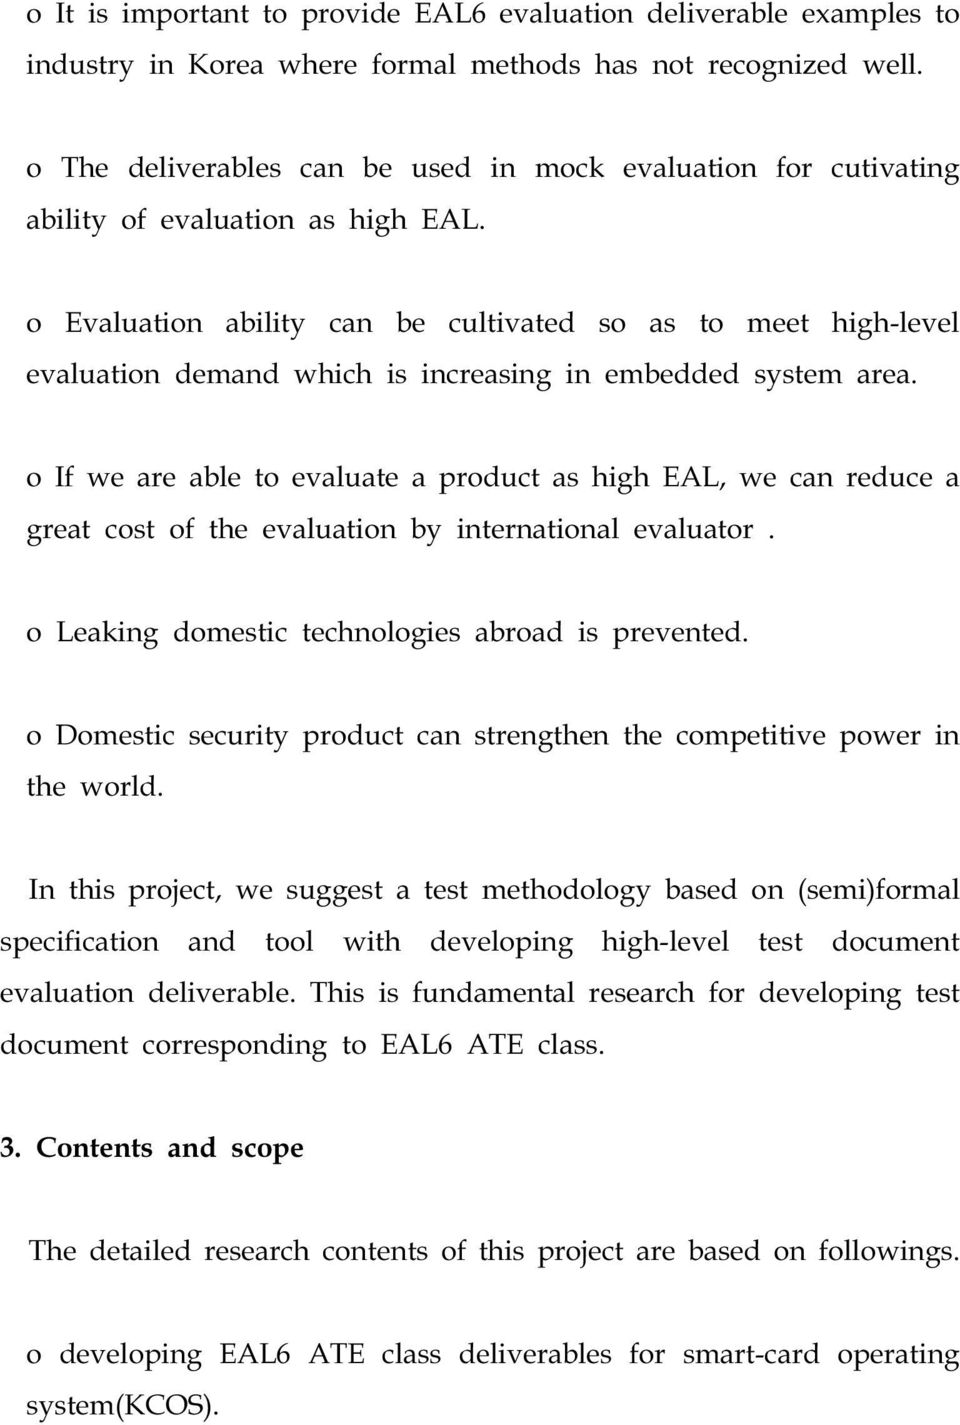 o Evaluation ability can be cultivated so as to meet high-level evaluation demand which is increasing in embedded system area.